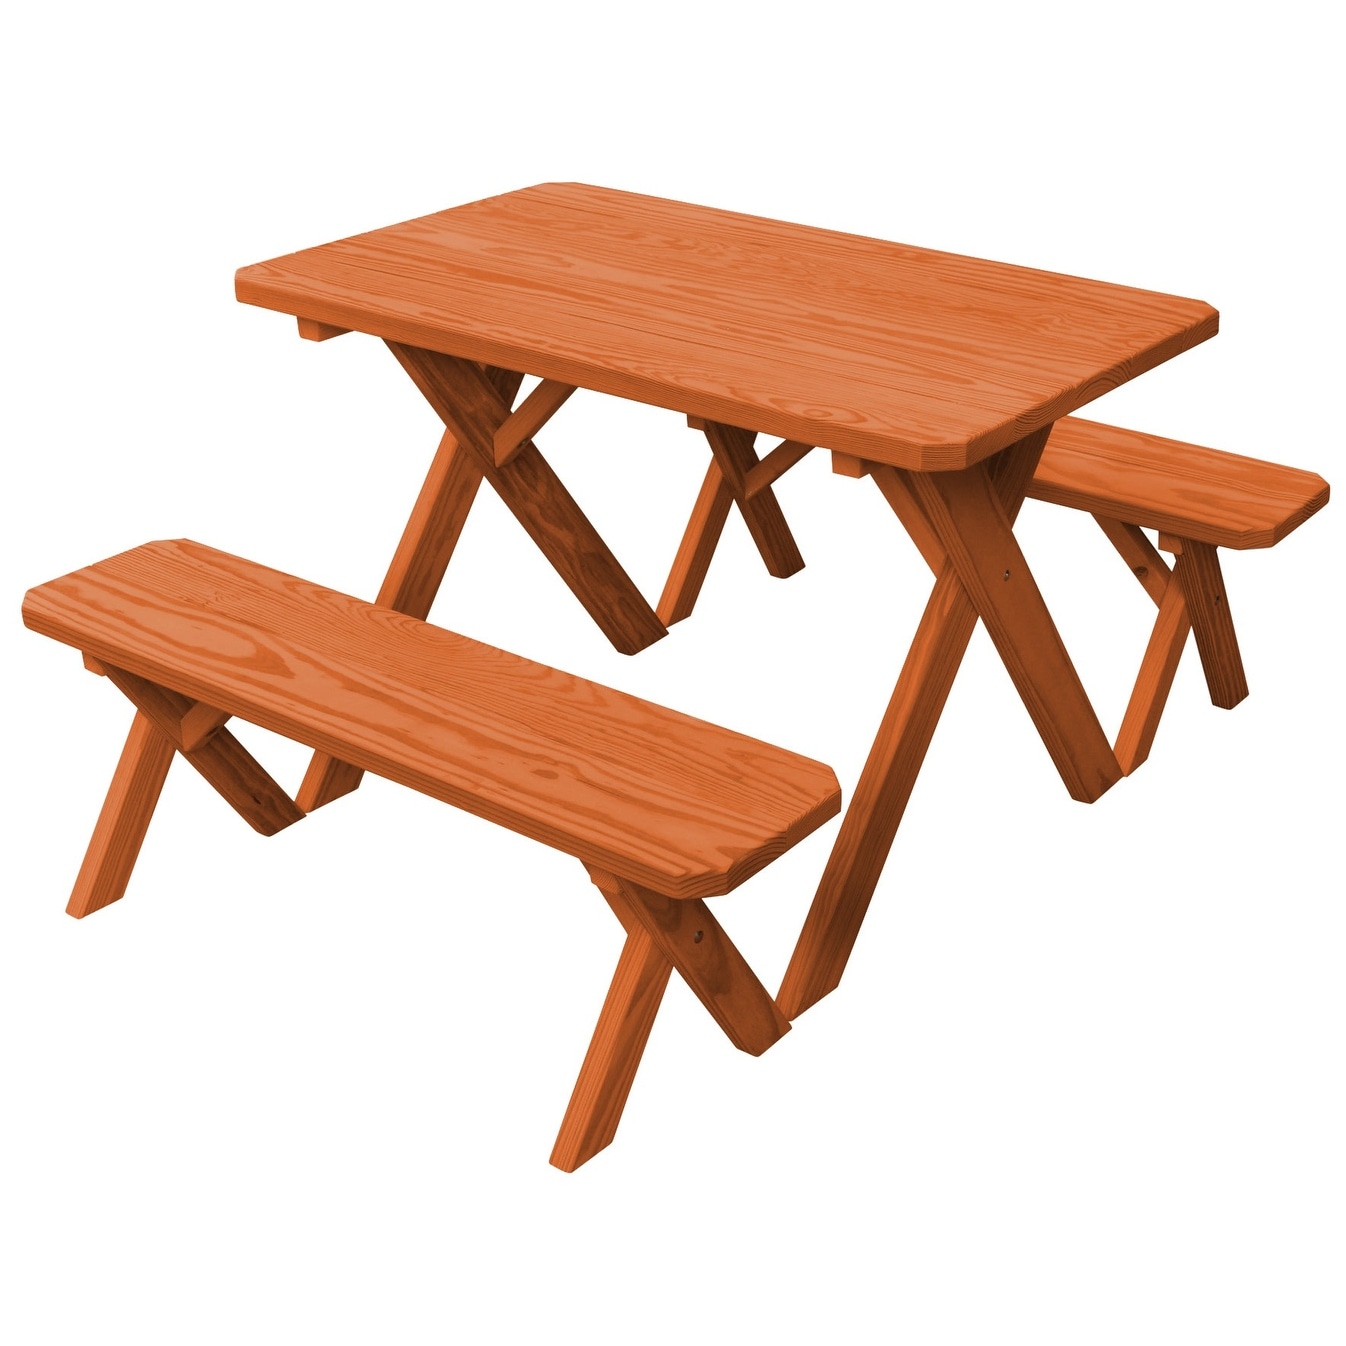 Pressure Treated Pine 4 Cross-leg Picnic Table With 2 Benches